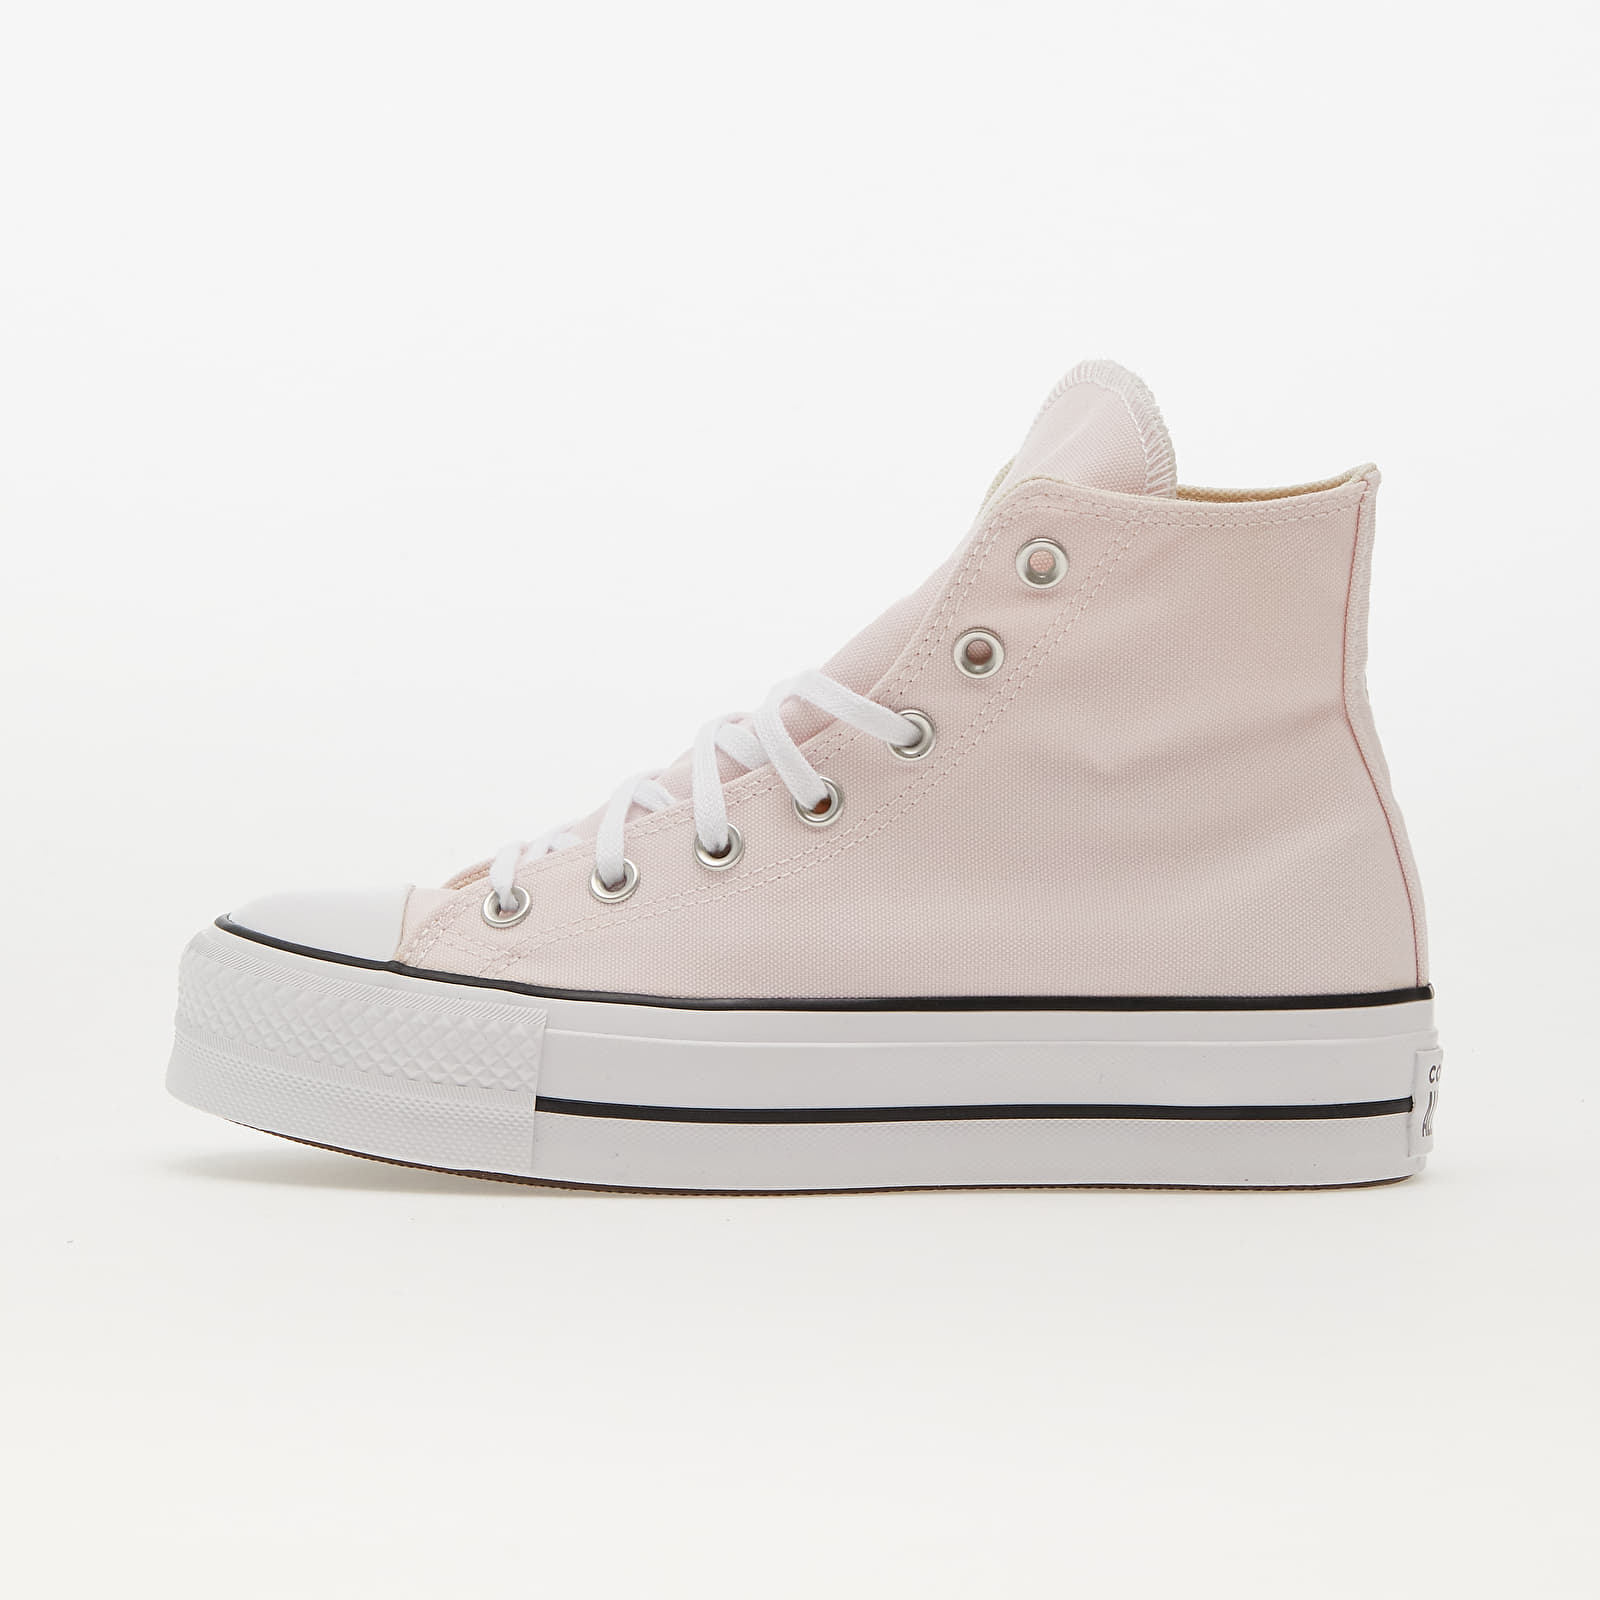 Buty damskie Converse Chuck Taylor All Star Lift Decade Pink/ White/ Black